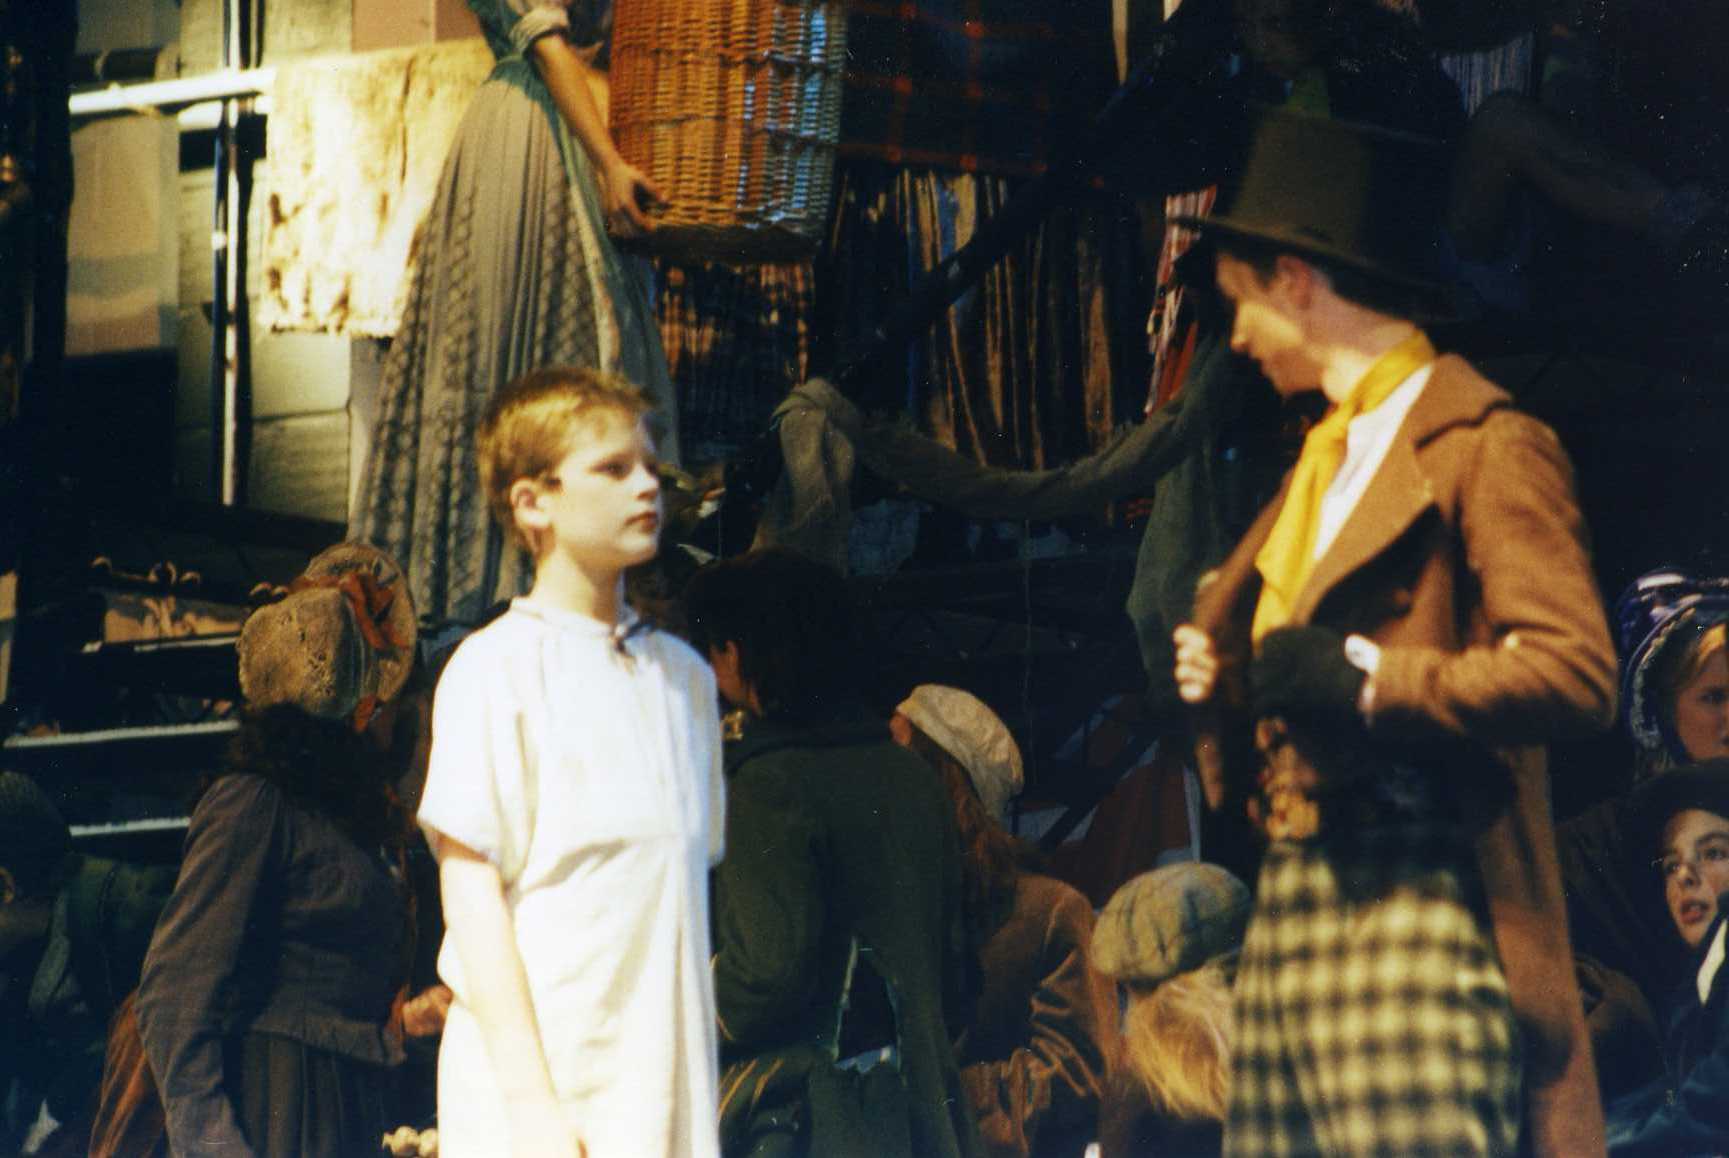 Oliver cast and crew 2001 and 1981